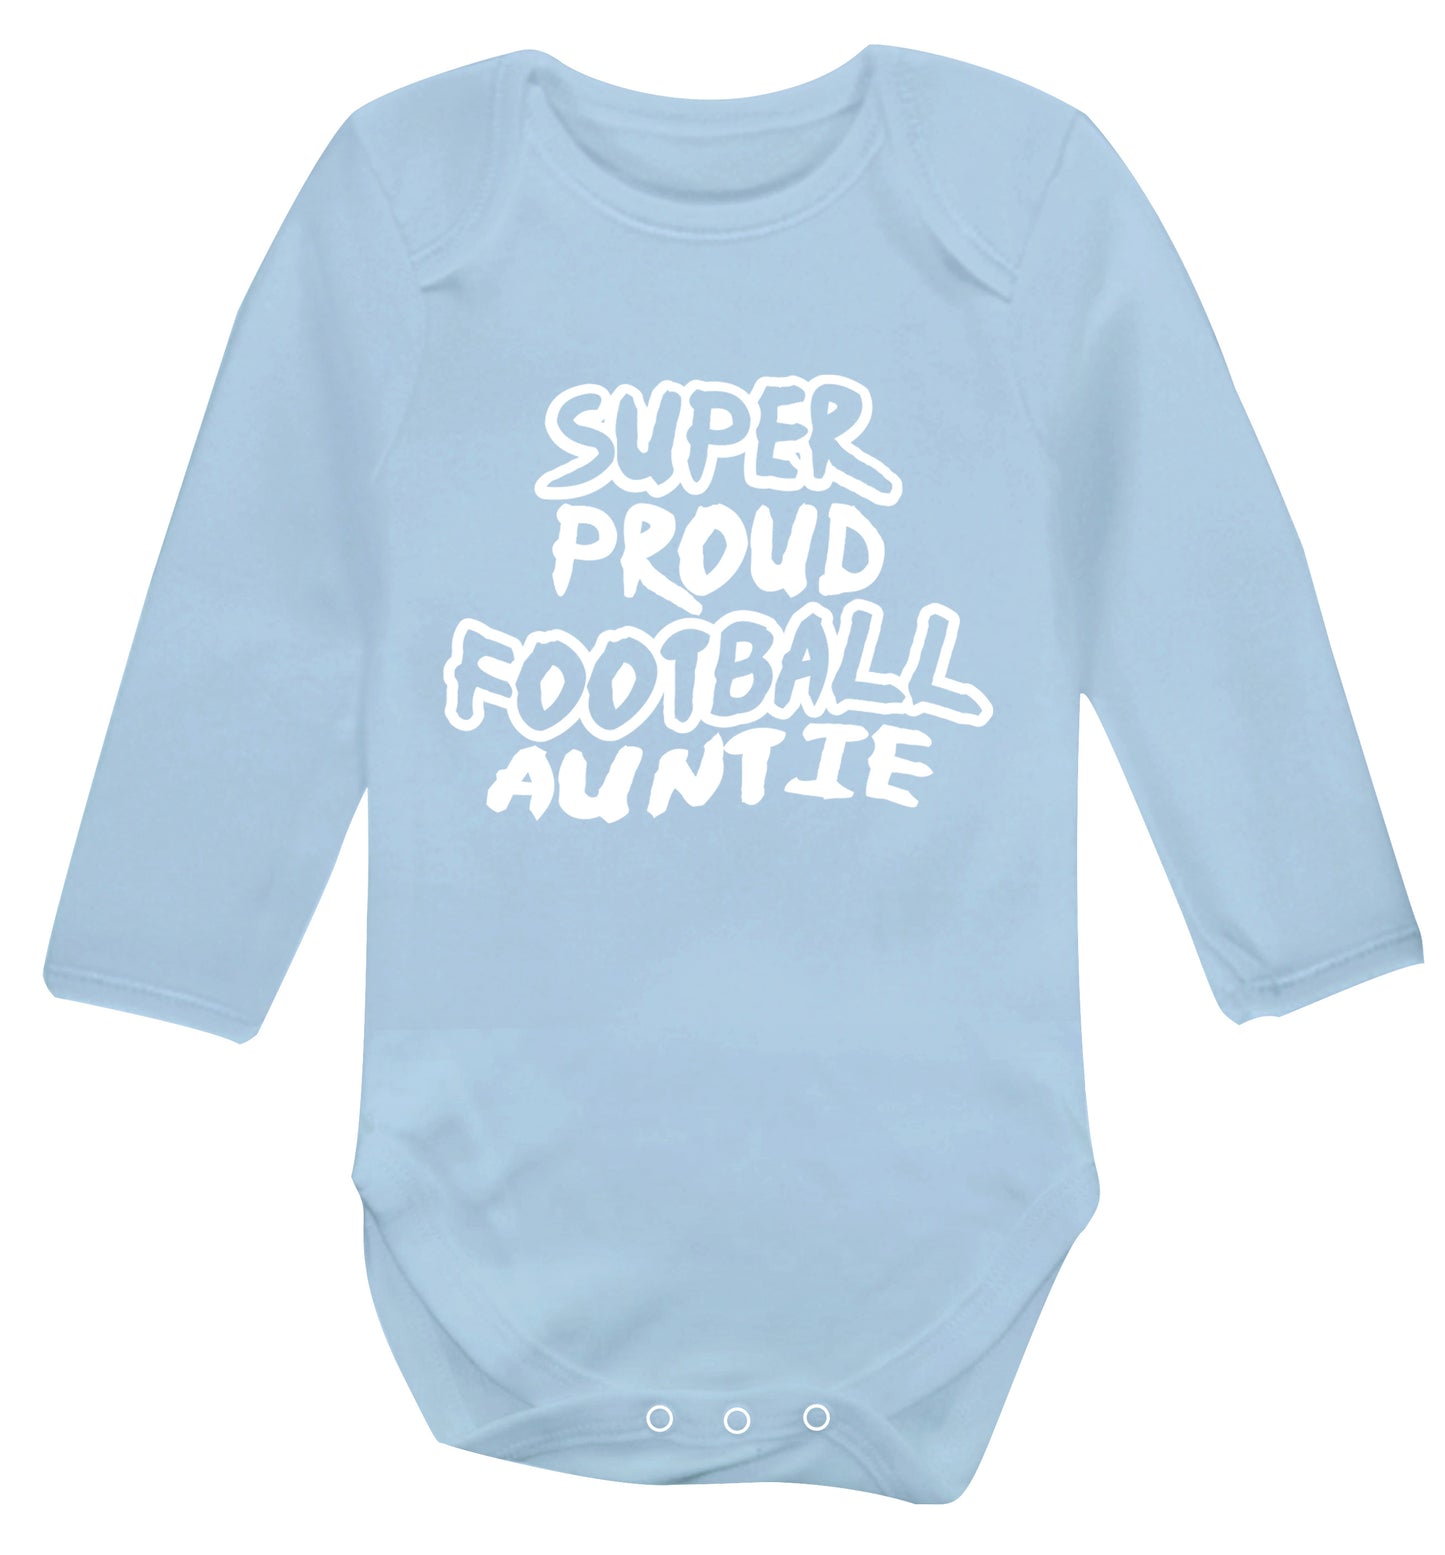 Super proud football auntie Baby Vest long sleeved pale blue 6-12 months